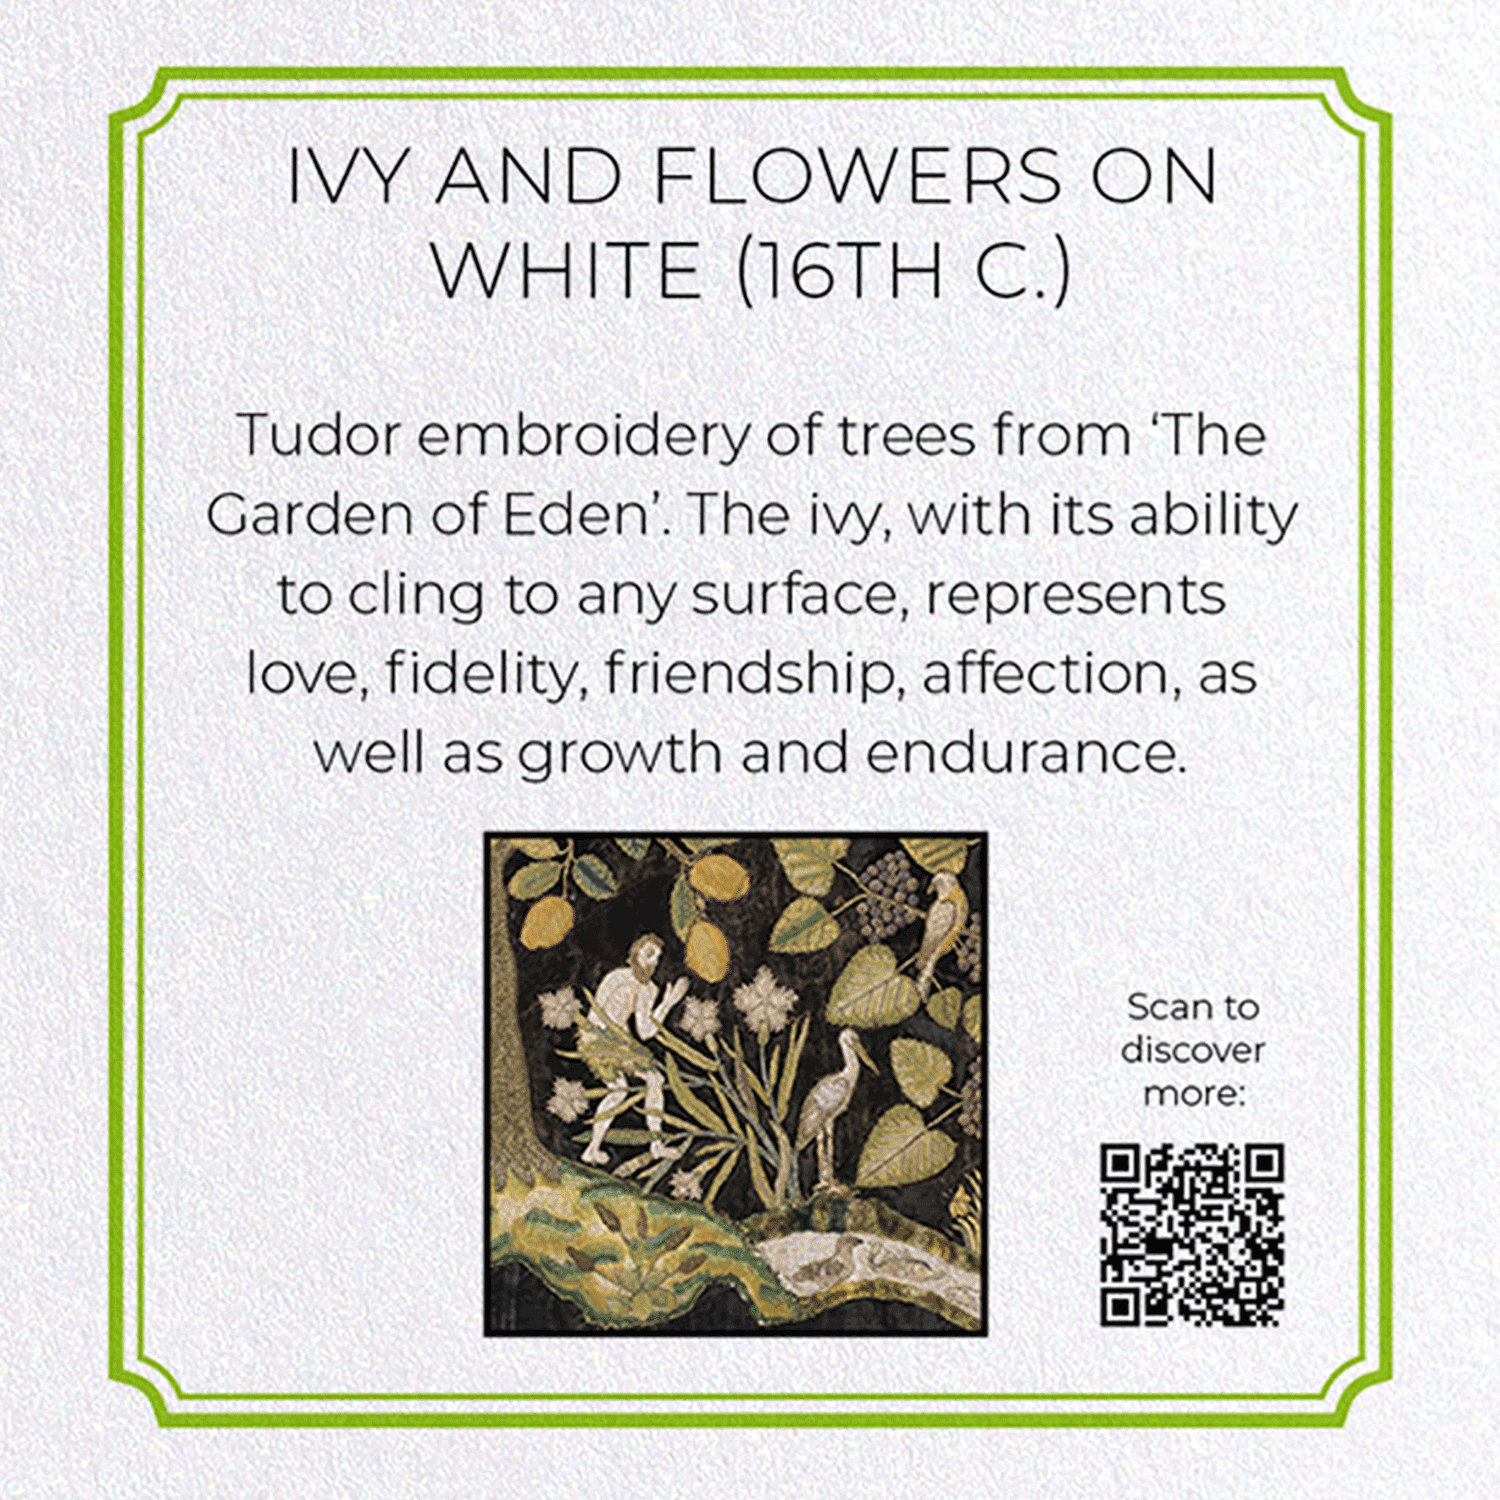 IVY AND FLOWERS ON WHITE (16TH C.): Pattern Greeting Card